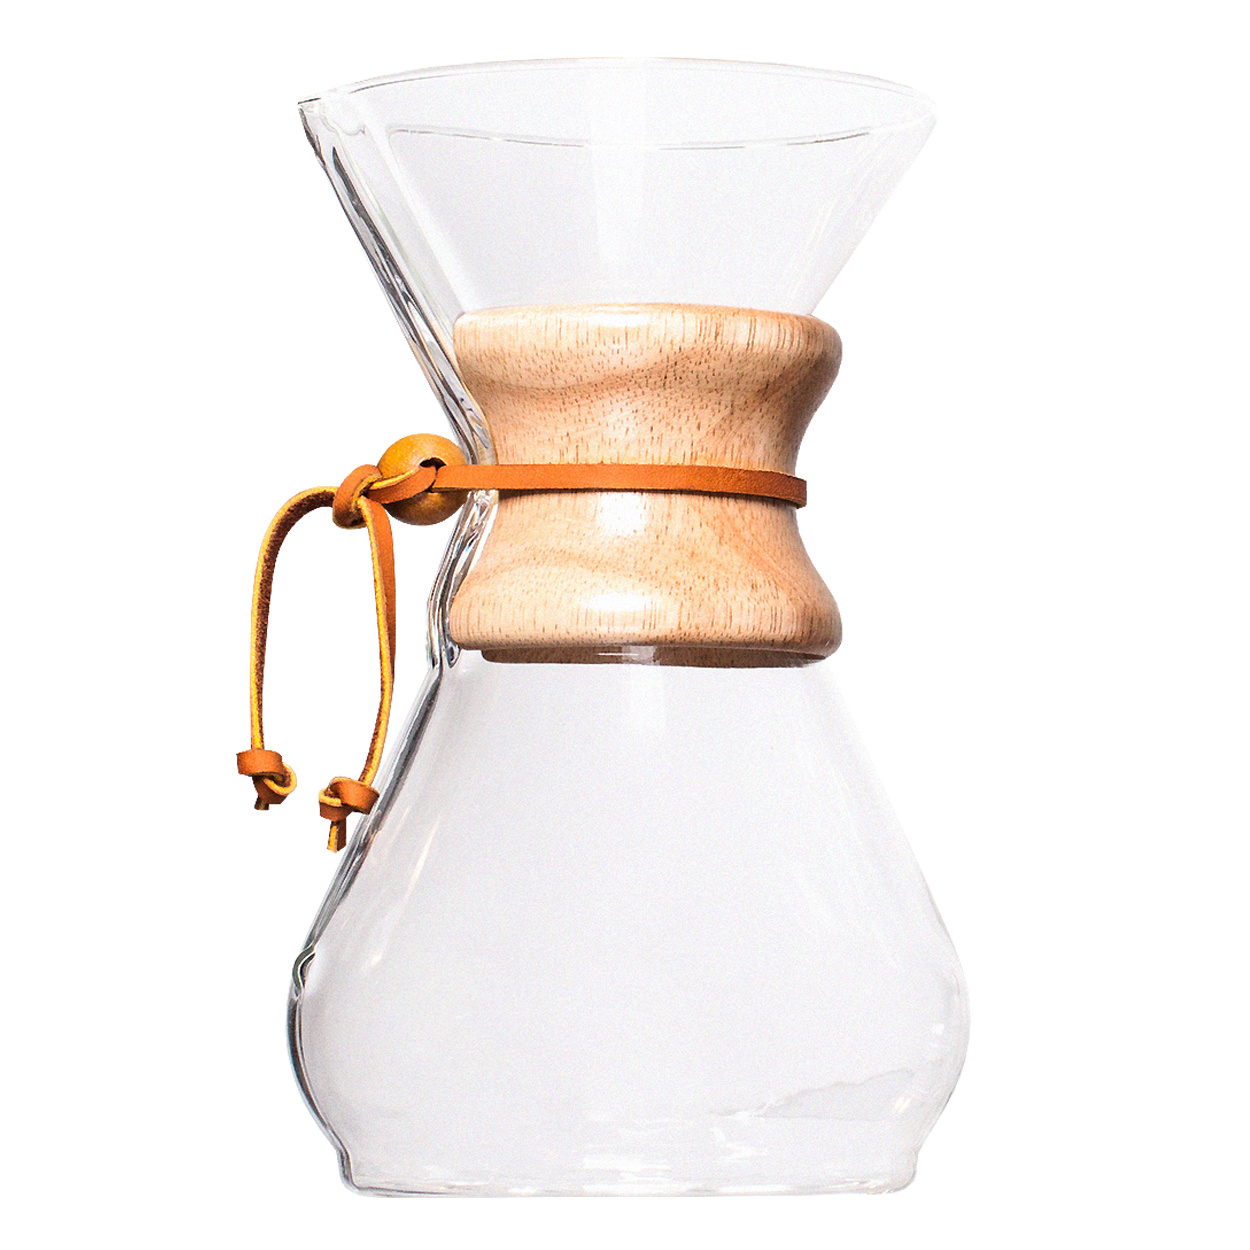 Chemex Pour-Over Glass Coffeemaker - Classic Series - 3-Cup - Exclusive  Packaging